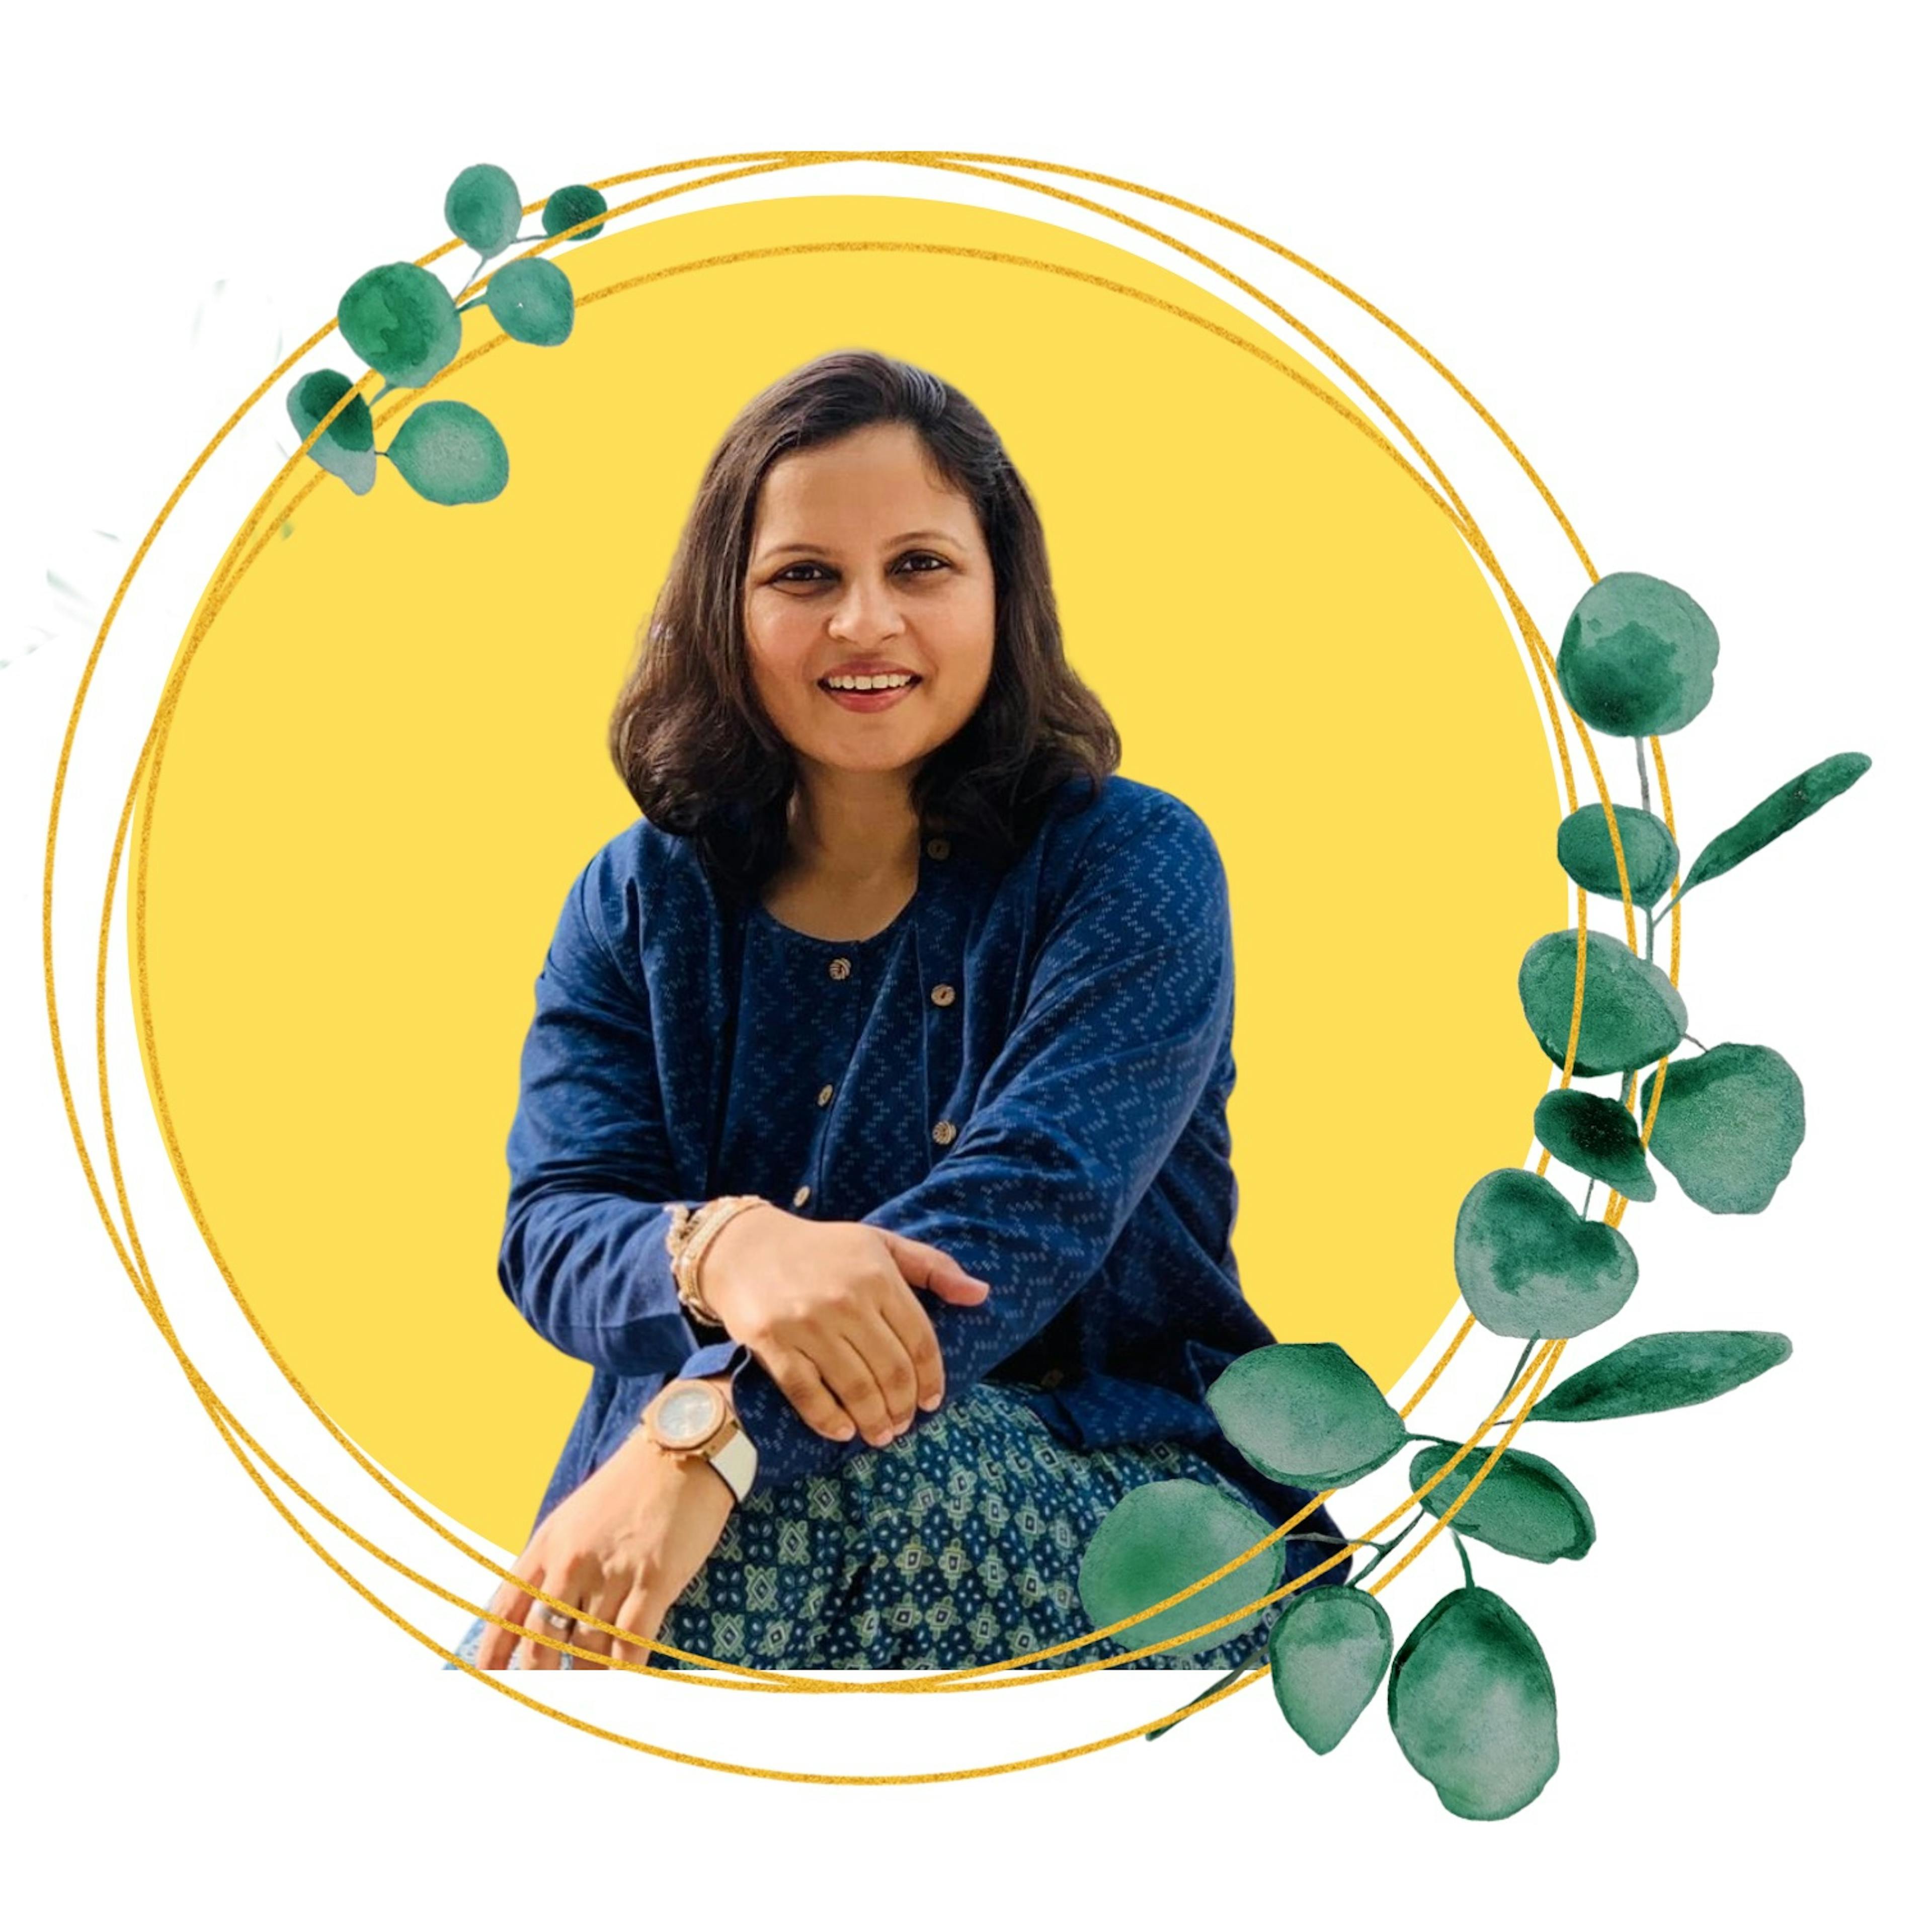 /meet-the-writer-aditi-syal-pulls-inspiration-from-the-success-of-renowned-companies feature image